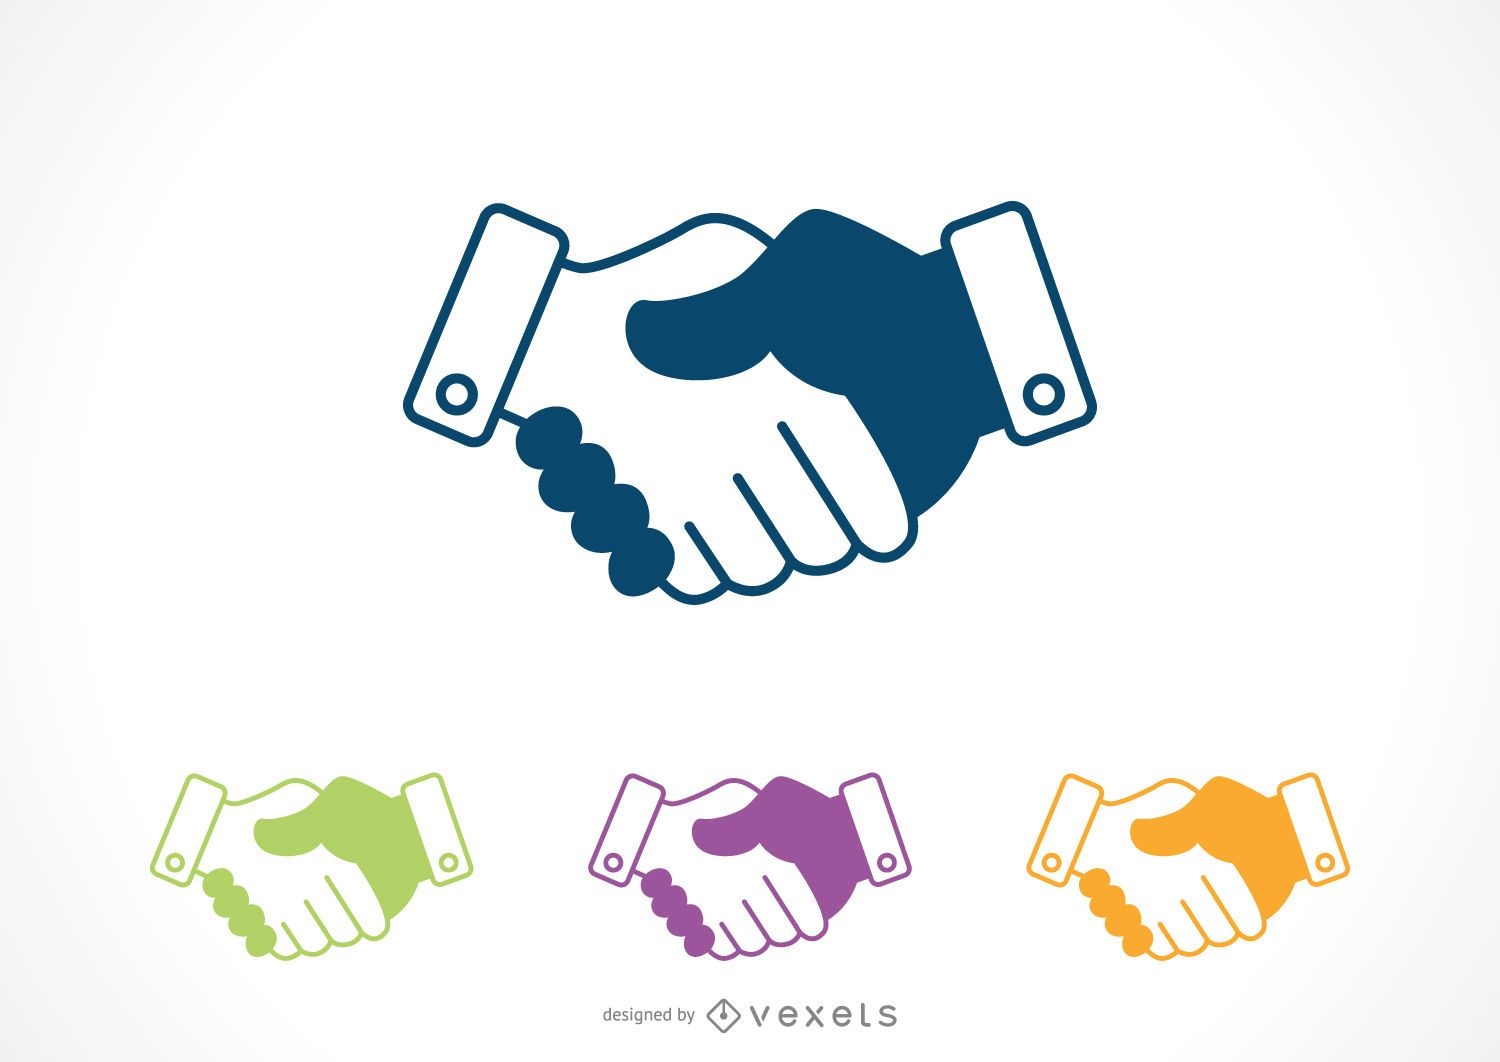 Shaking hands icon set